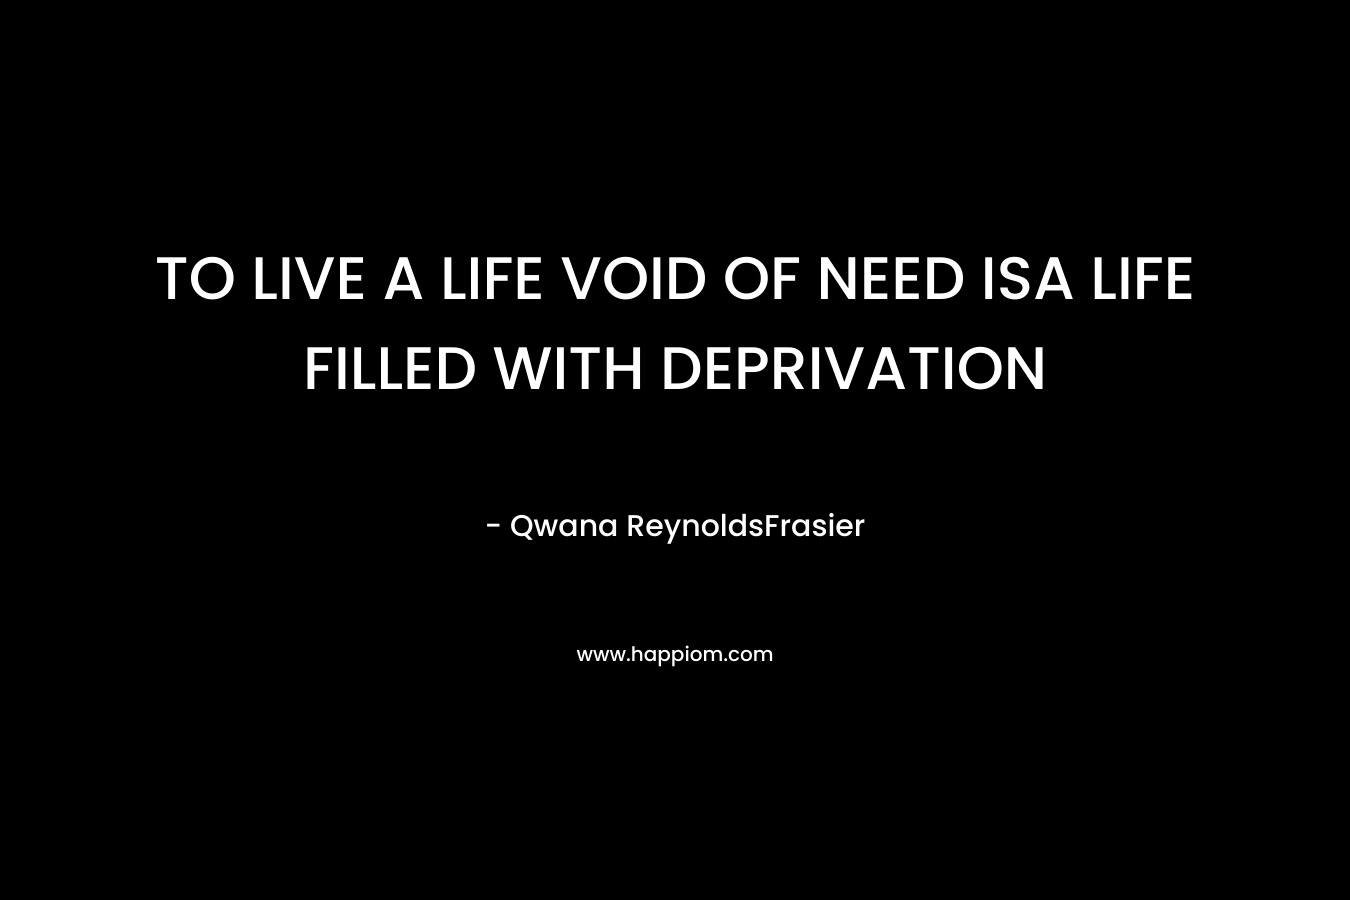 TO LIVE A LIFE VOID OF NEED ISA LIFE FILLED WITH DEPRIVATION – Qwana ReynoldsFrasier